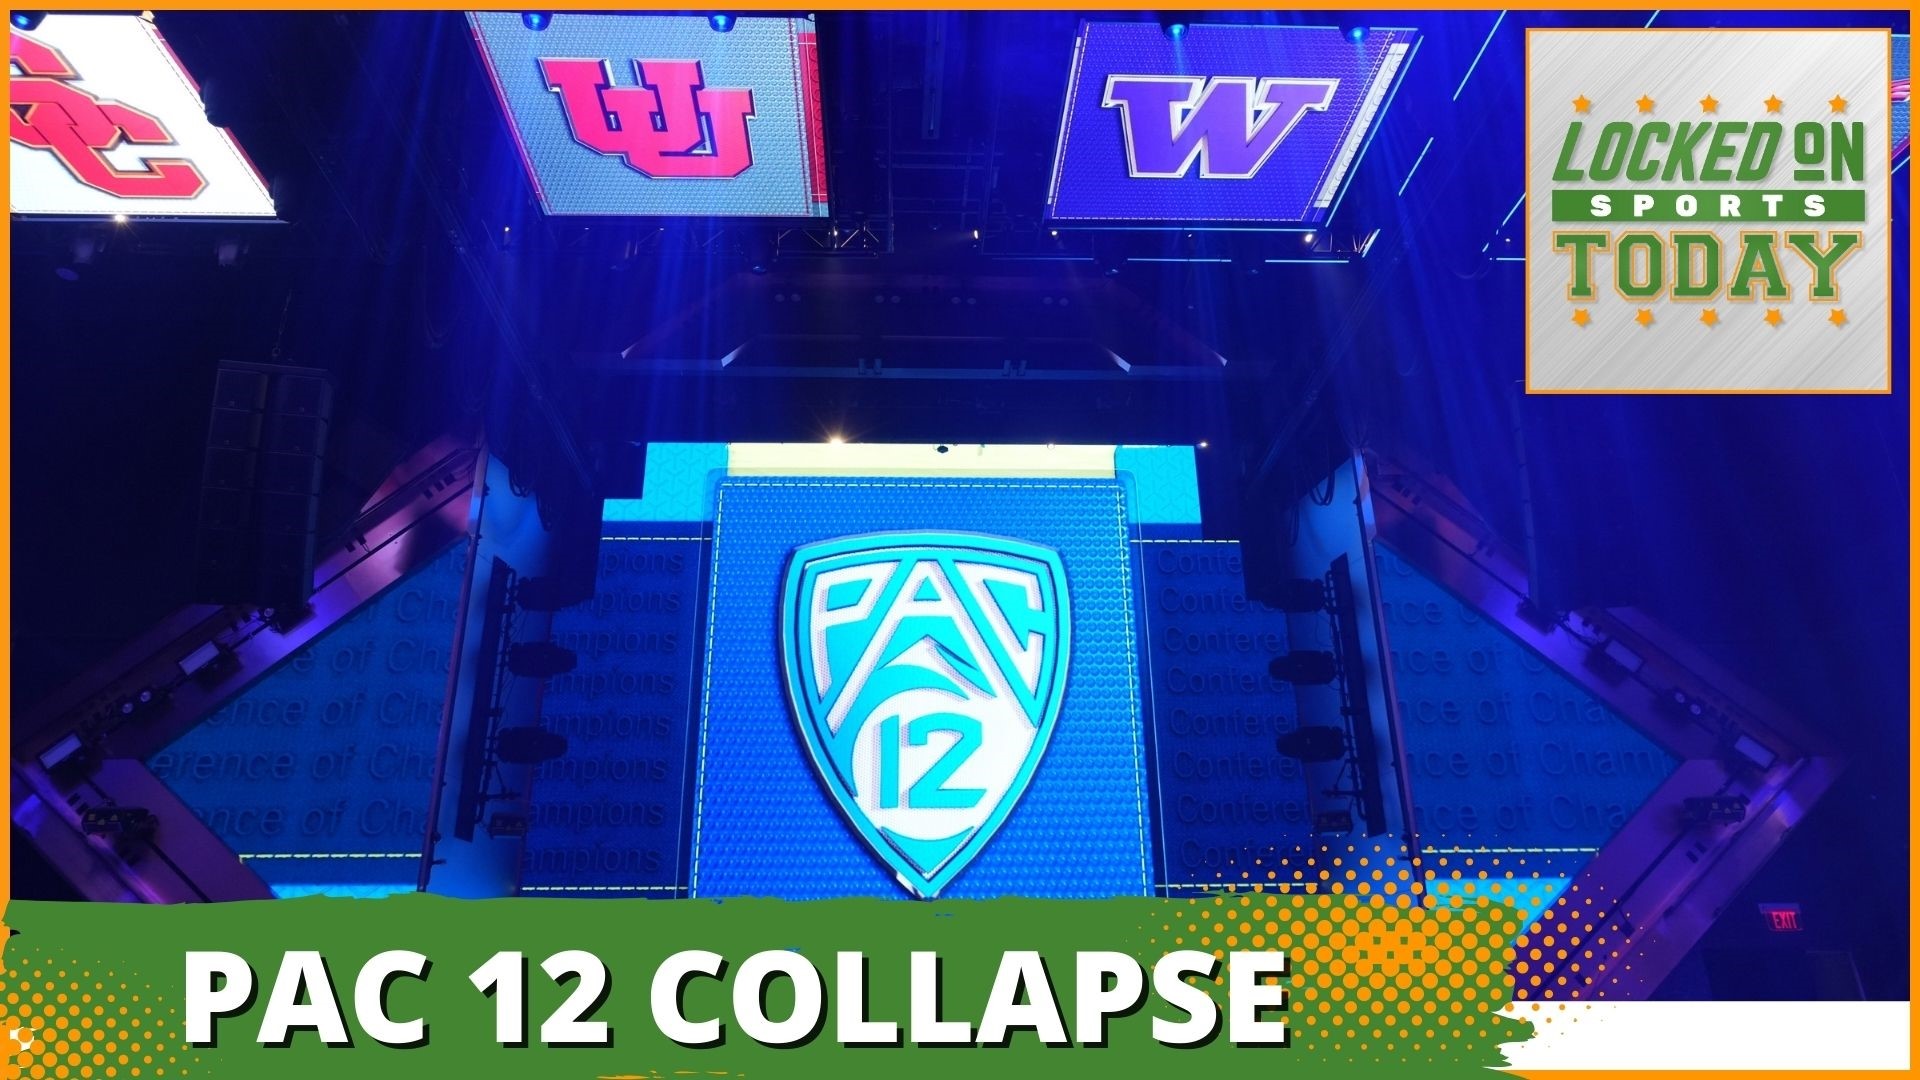 Discussing the day's top sports stories from the Pac 12's future and a possible Big 10 expansion to Anthony Davis' big pay day.